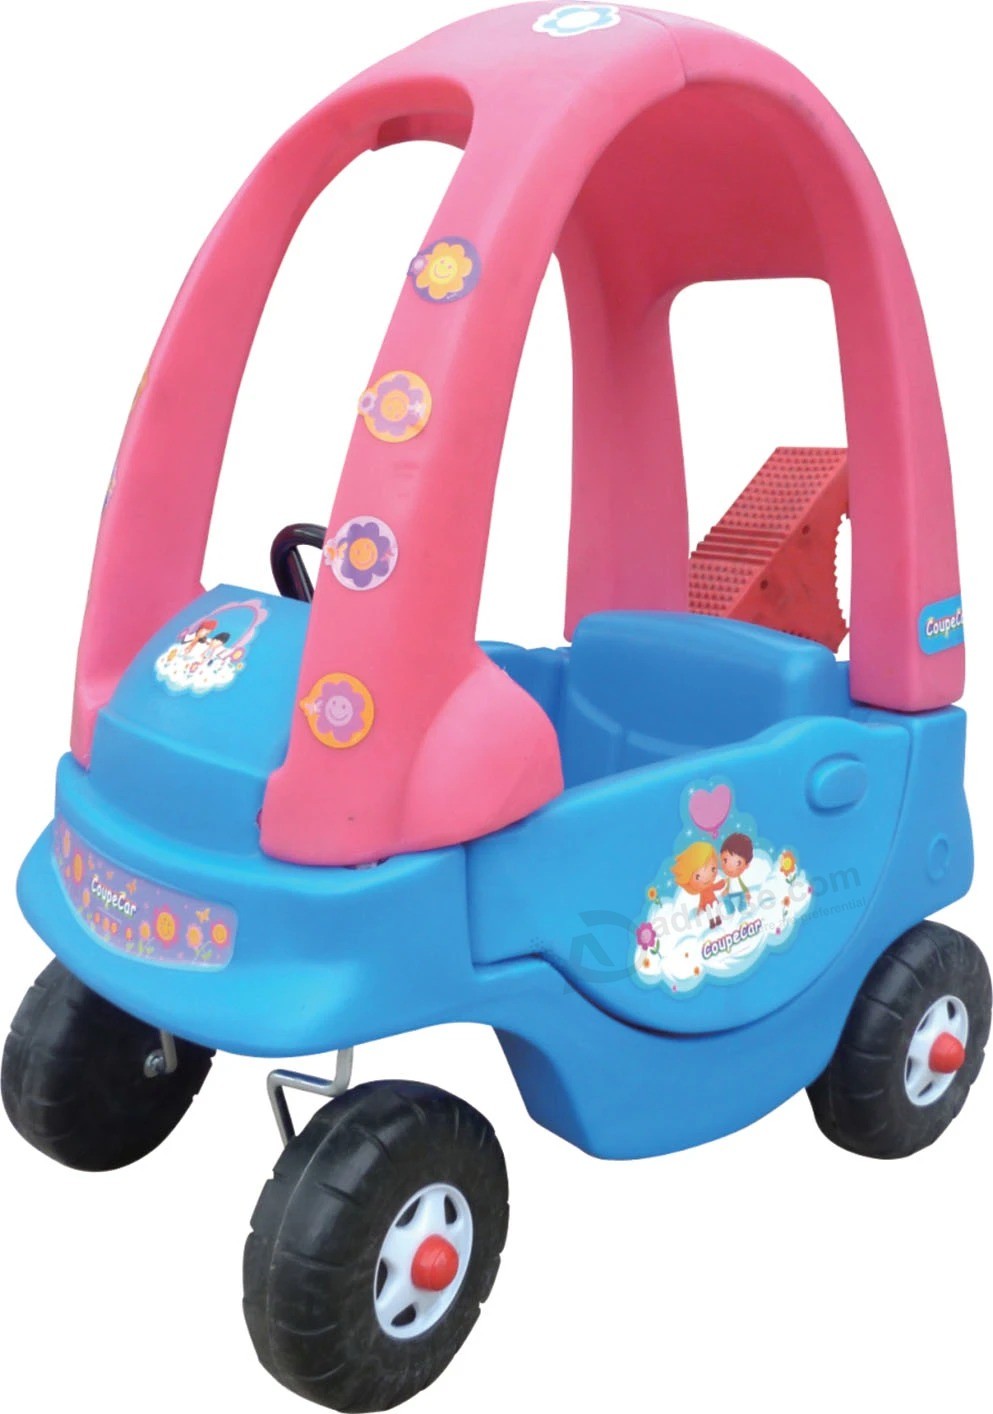 Princess Style Plastic Toy Cars, Kids Outdoor Toys